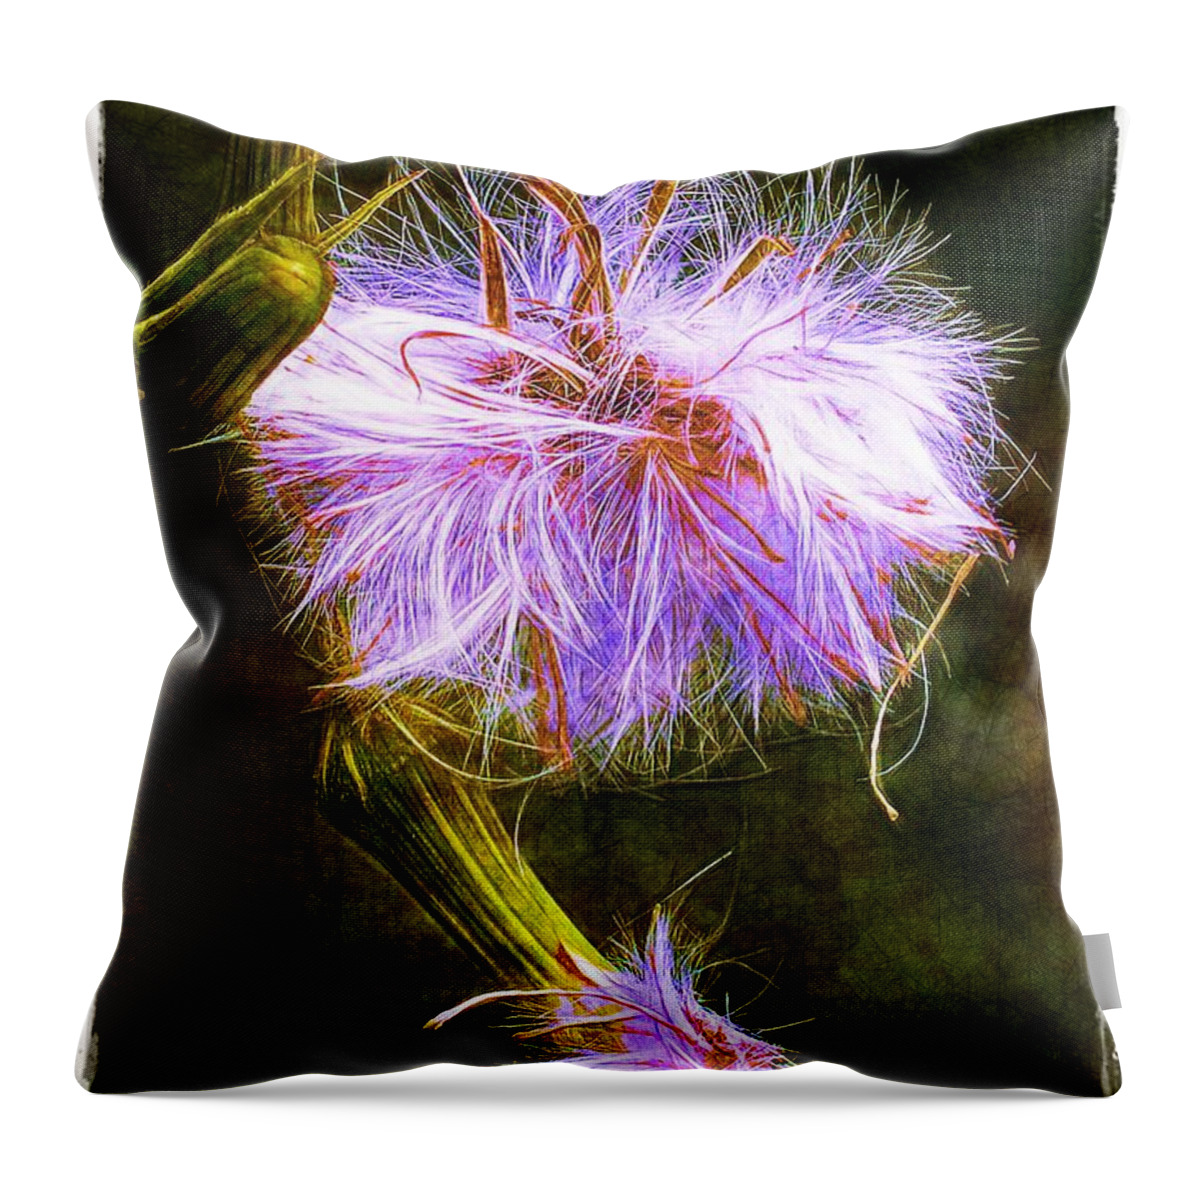 Seed Throw Pillow featuring the photograph Going to Seed by Judi Bagwell